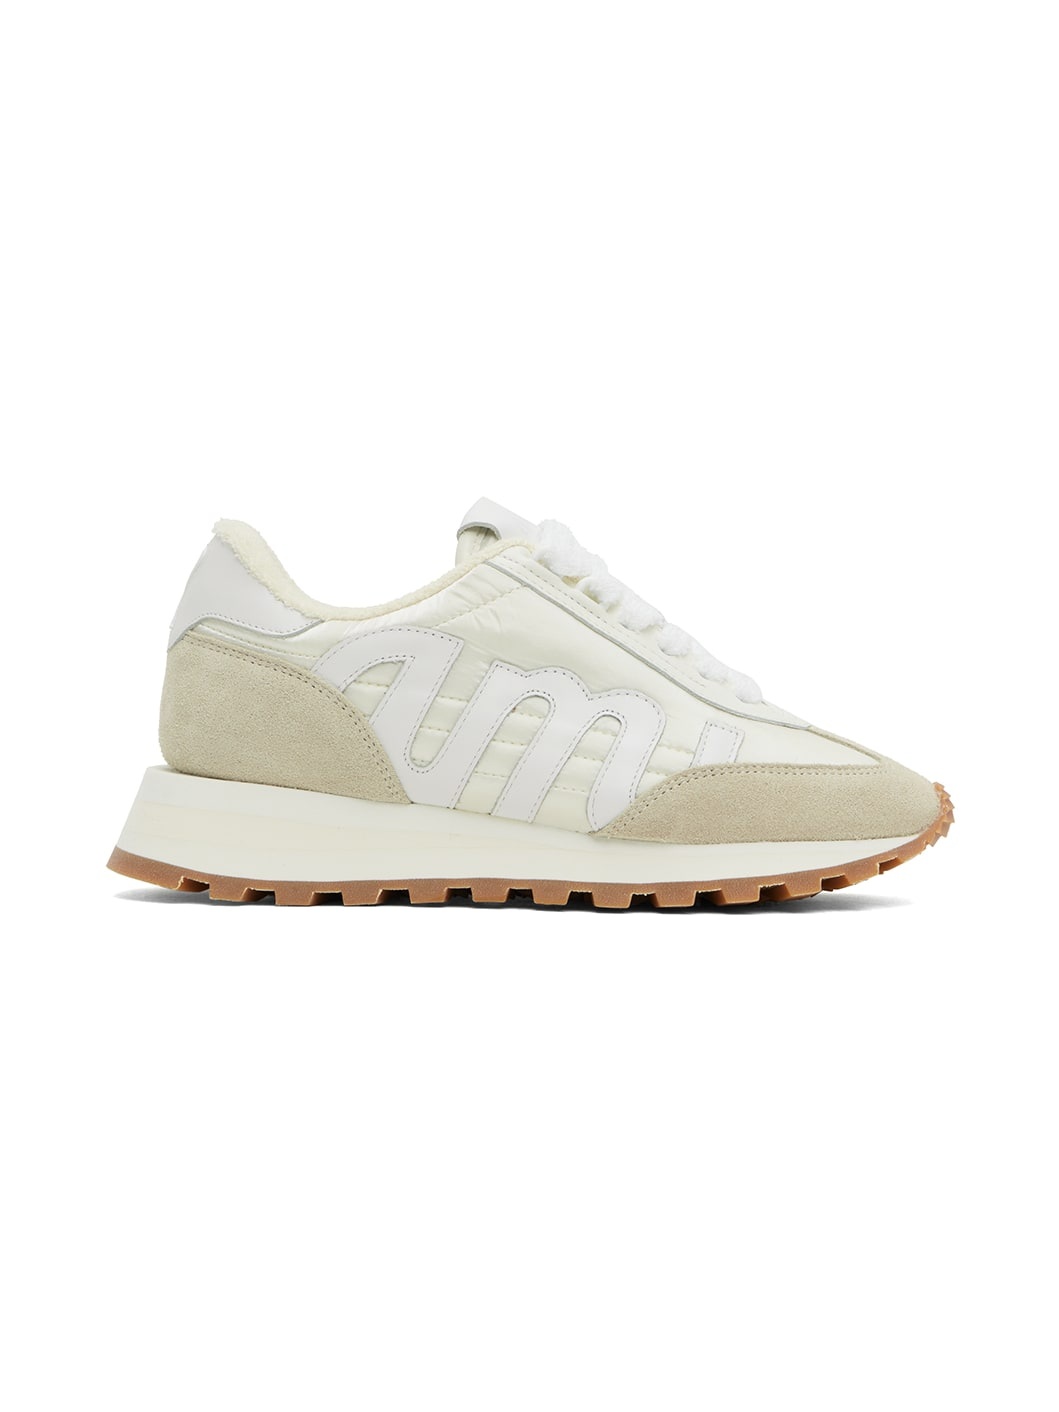 Off-White & Beige Rush Sneakers - 1